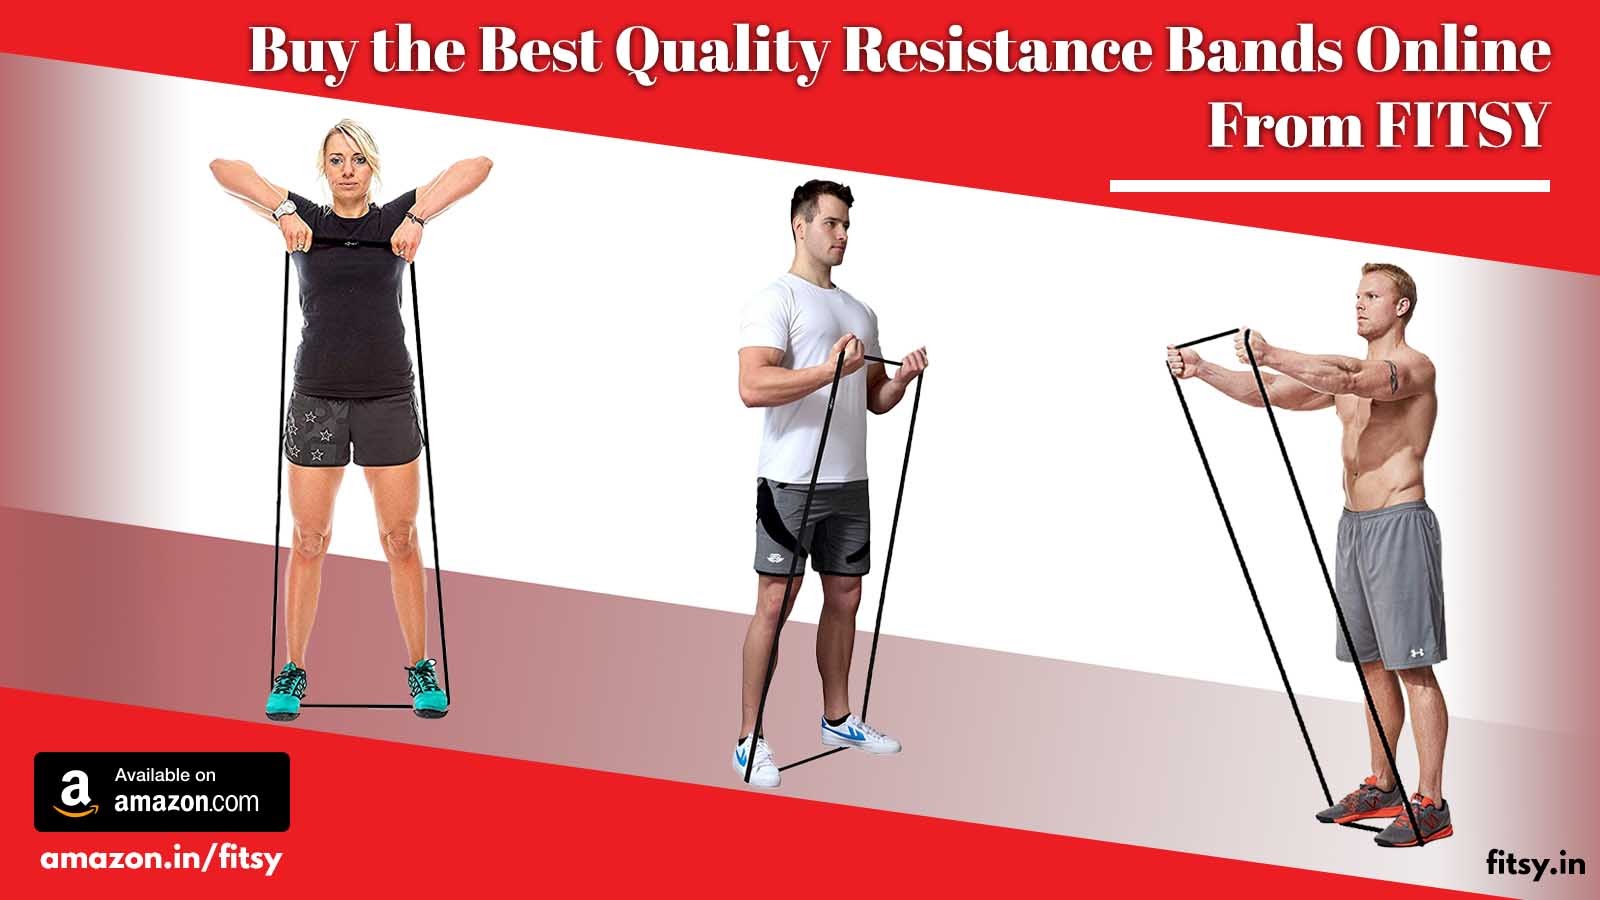 The Convenient Features of the Best Quality Resistance Bands Available Online